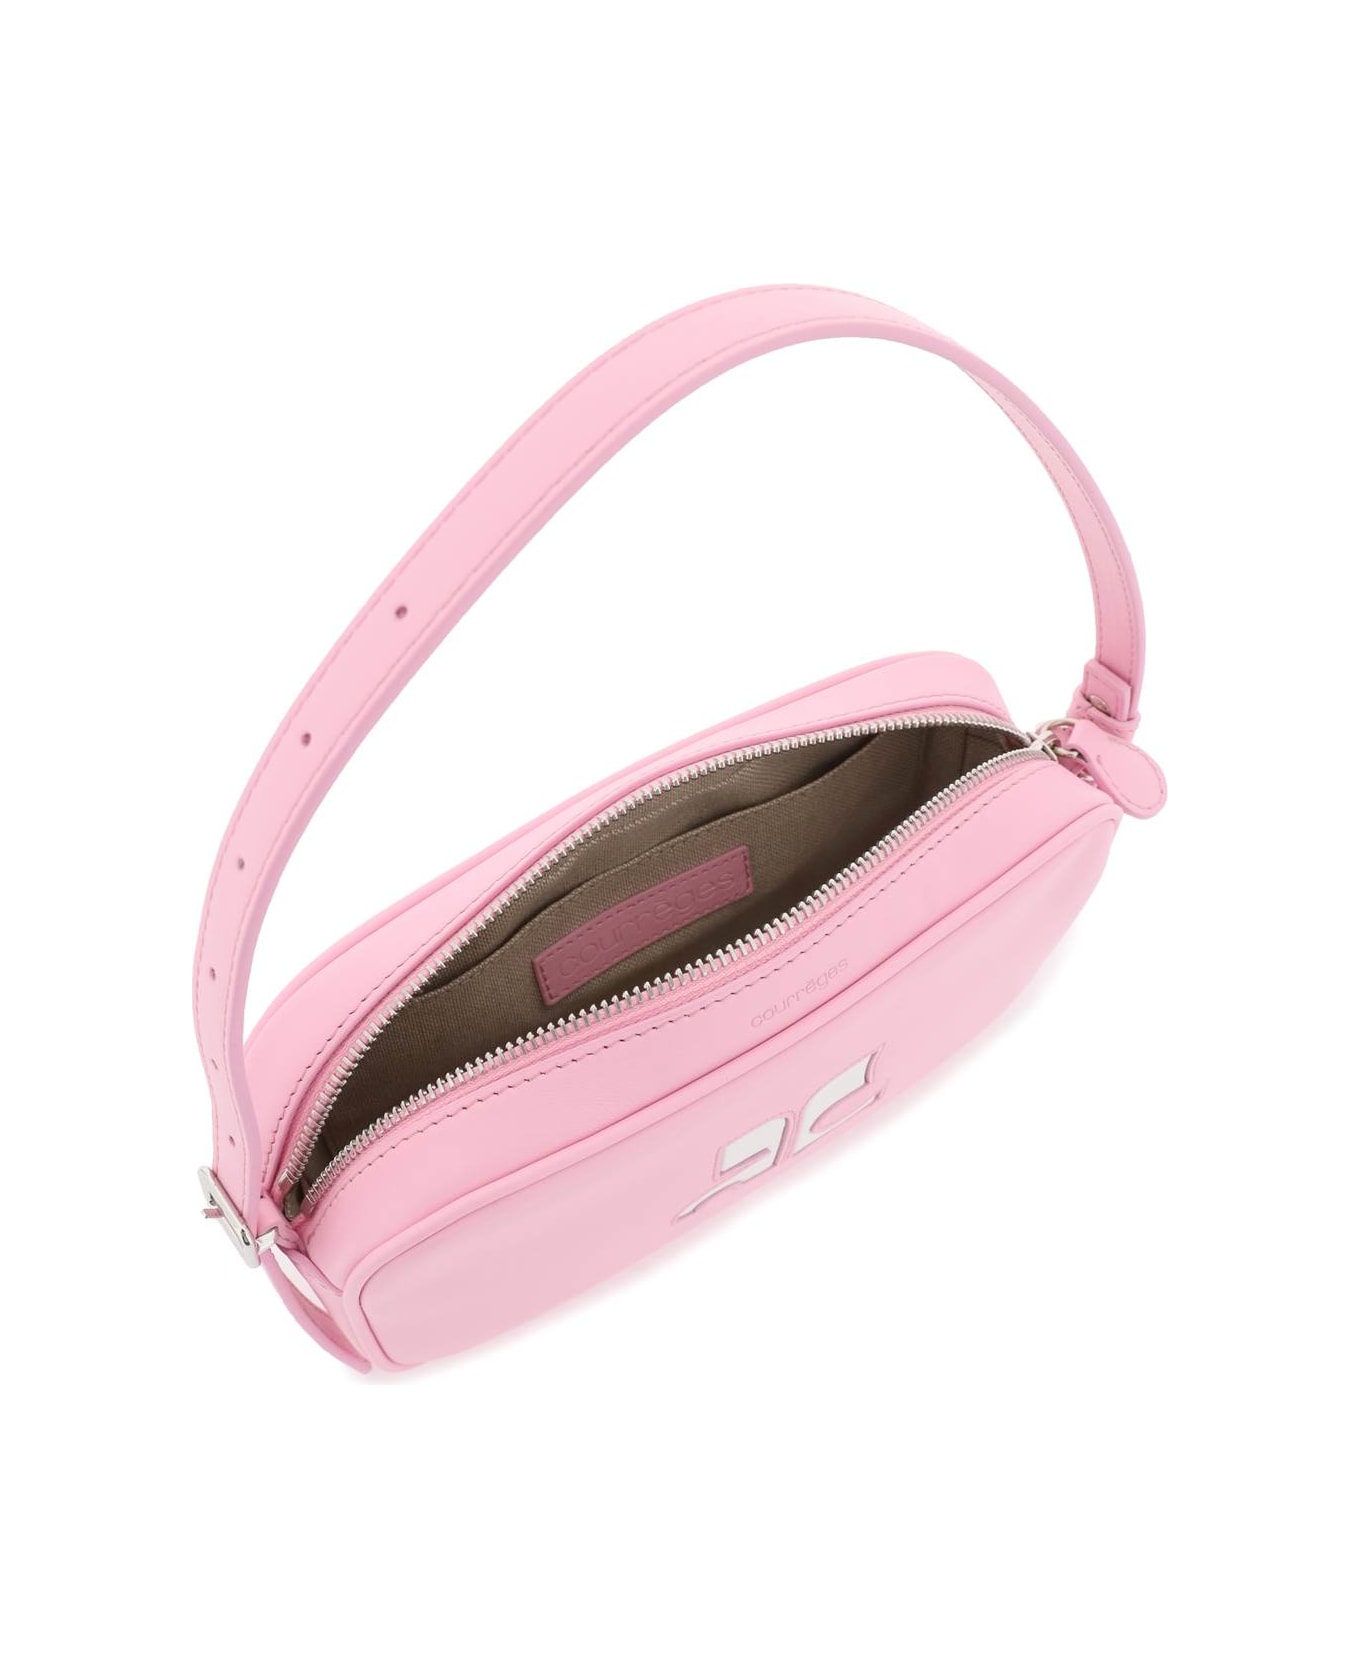 Courrèges Leather Baguette Bag - PINK ショルダーバッグ